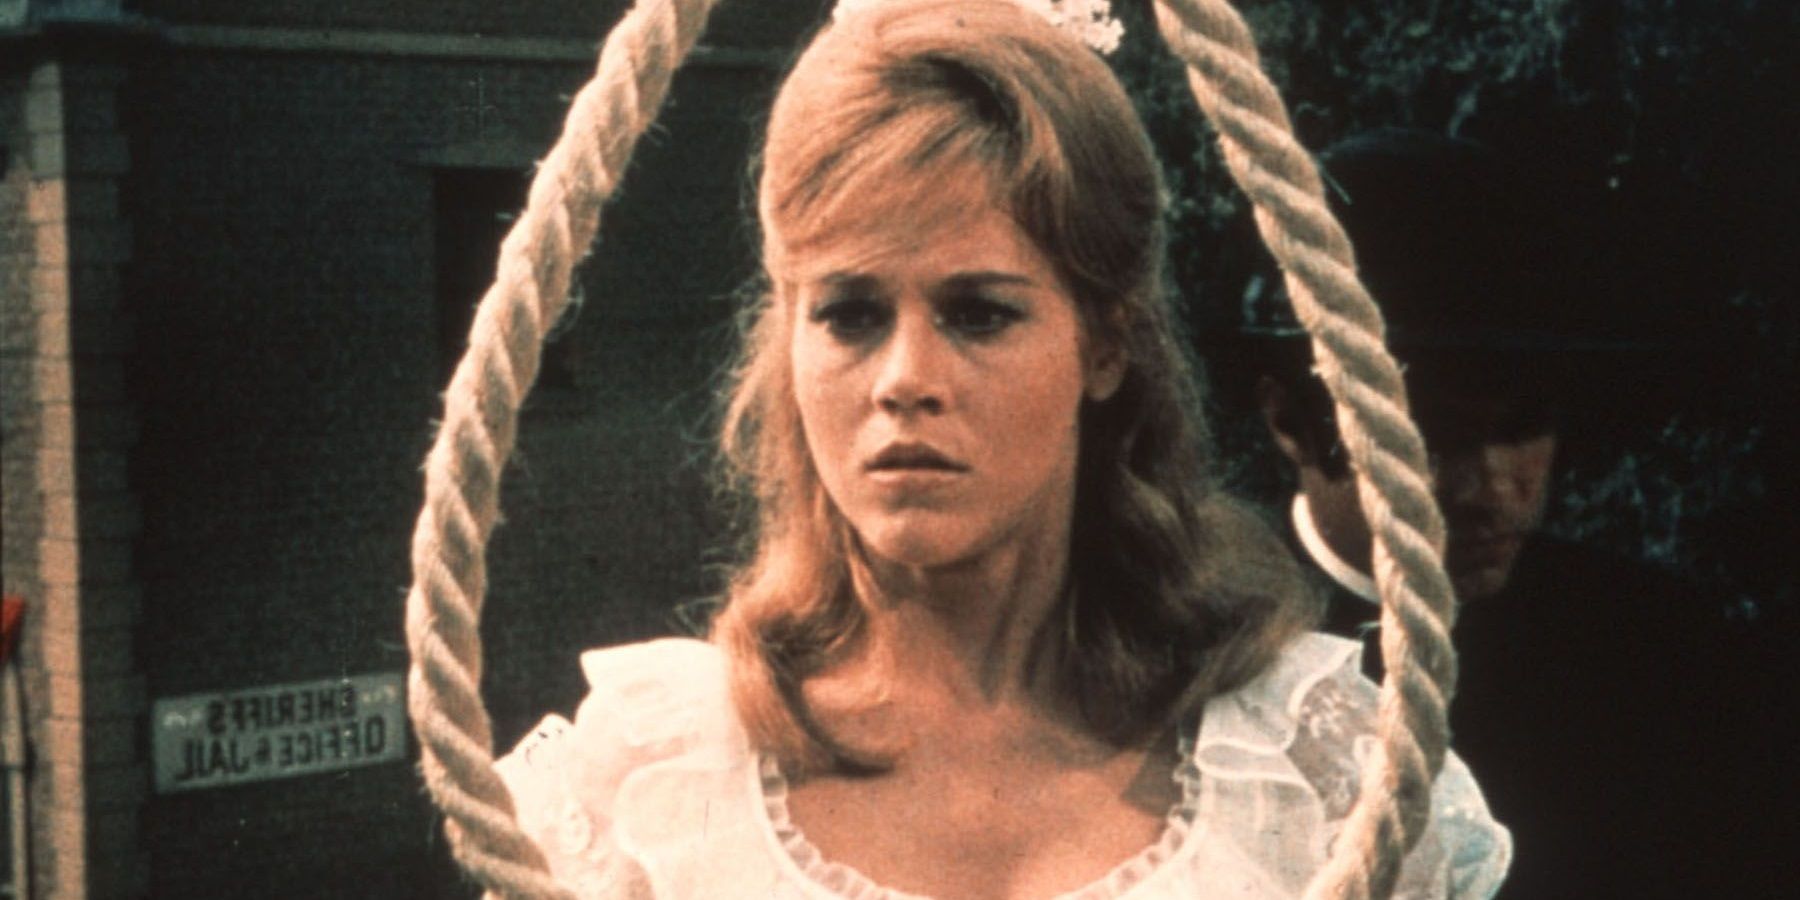 Cat Ballou looks at a noose